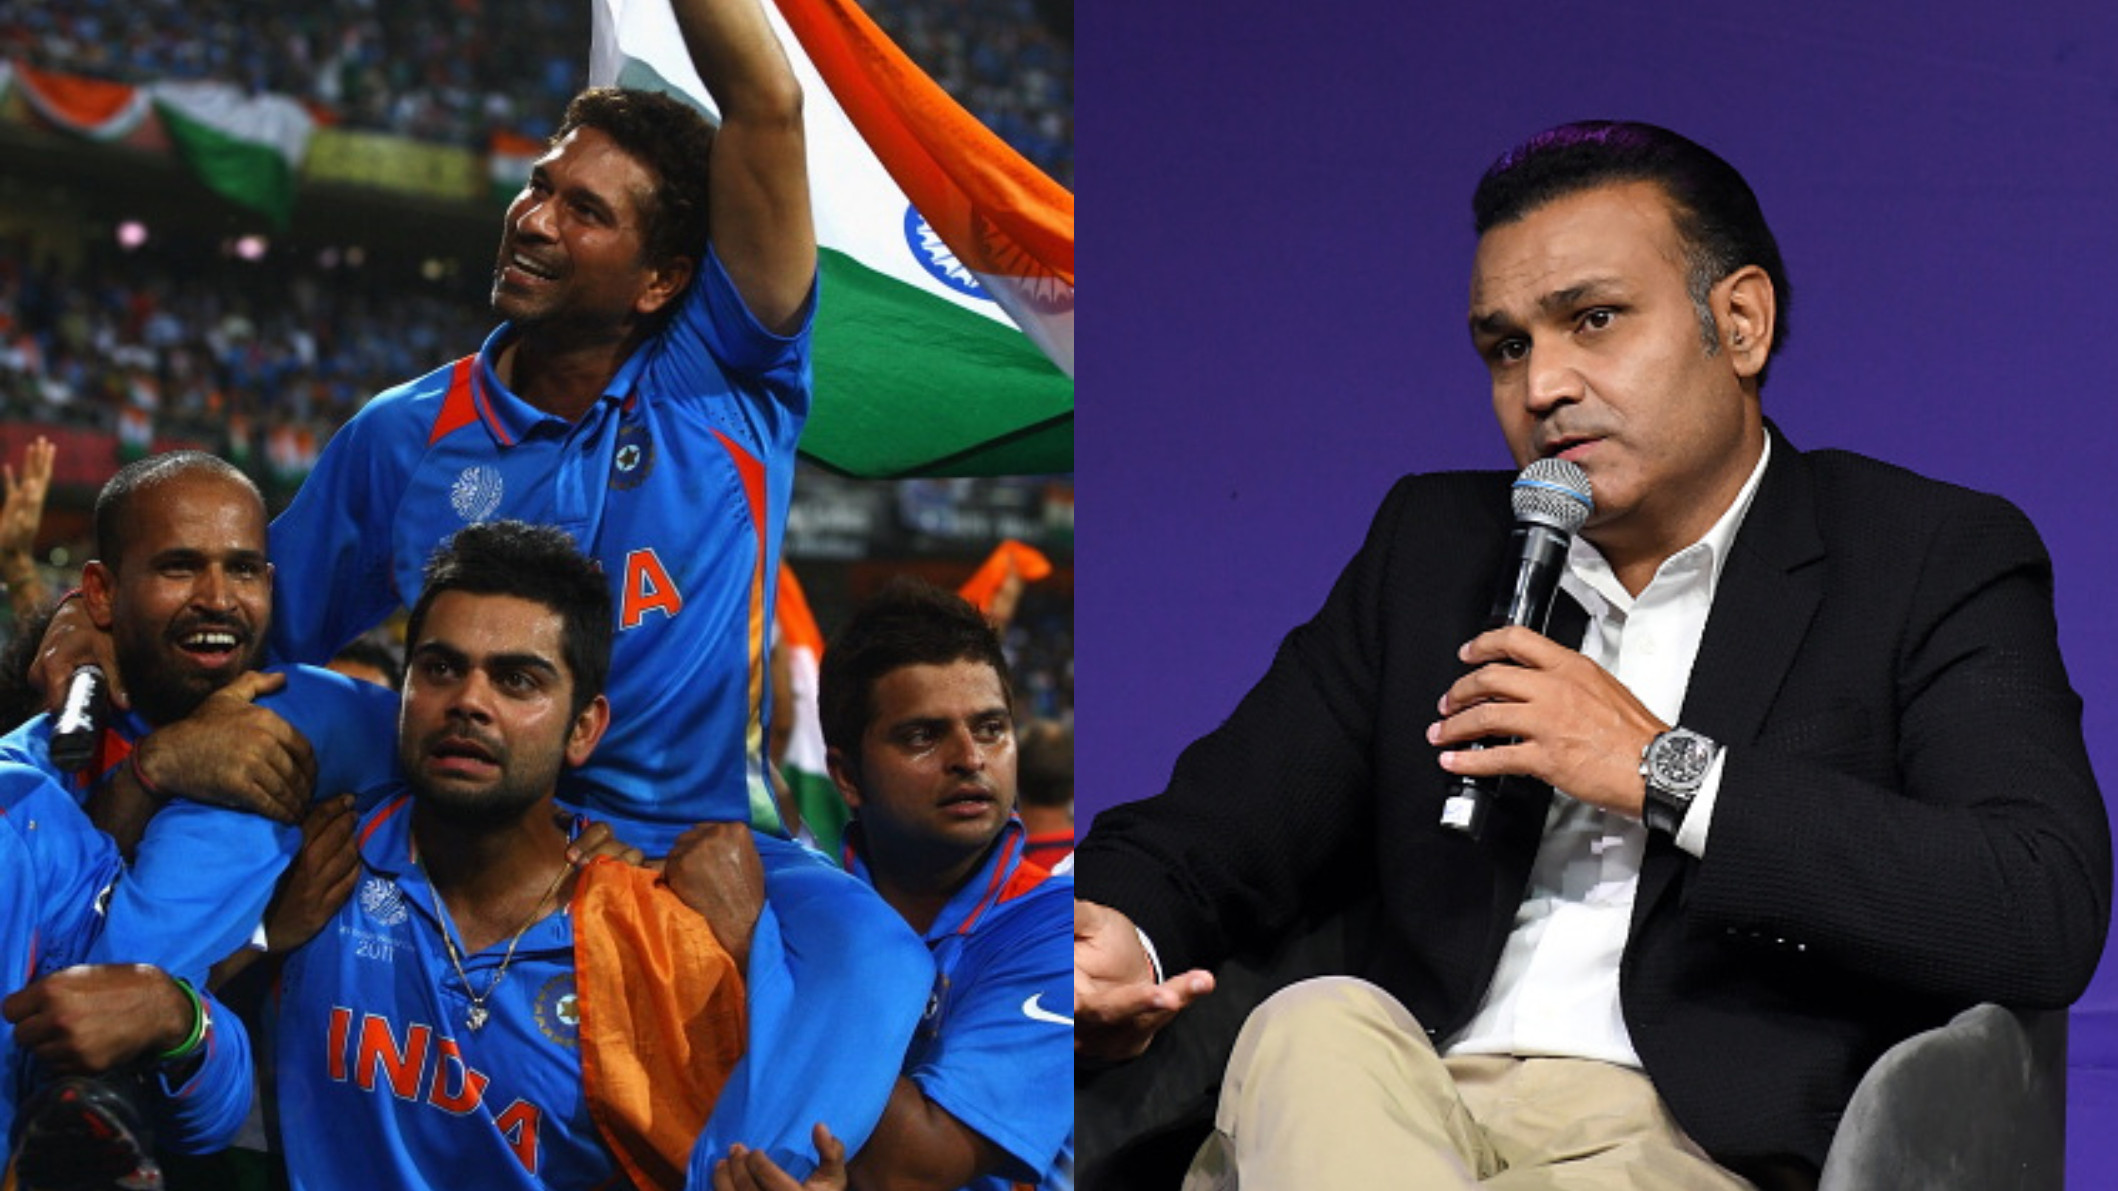 “MS Dhoni had knee problems”- Virender Sehwag reveals why Virat Kohli carried Sachin Tendulkar after 2011 WC final win